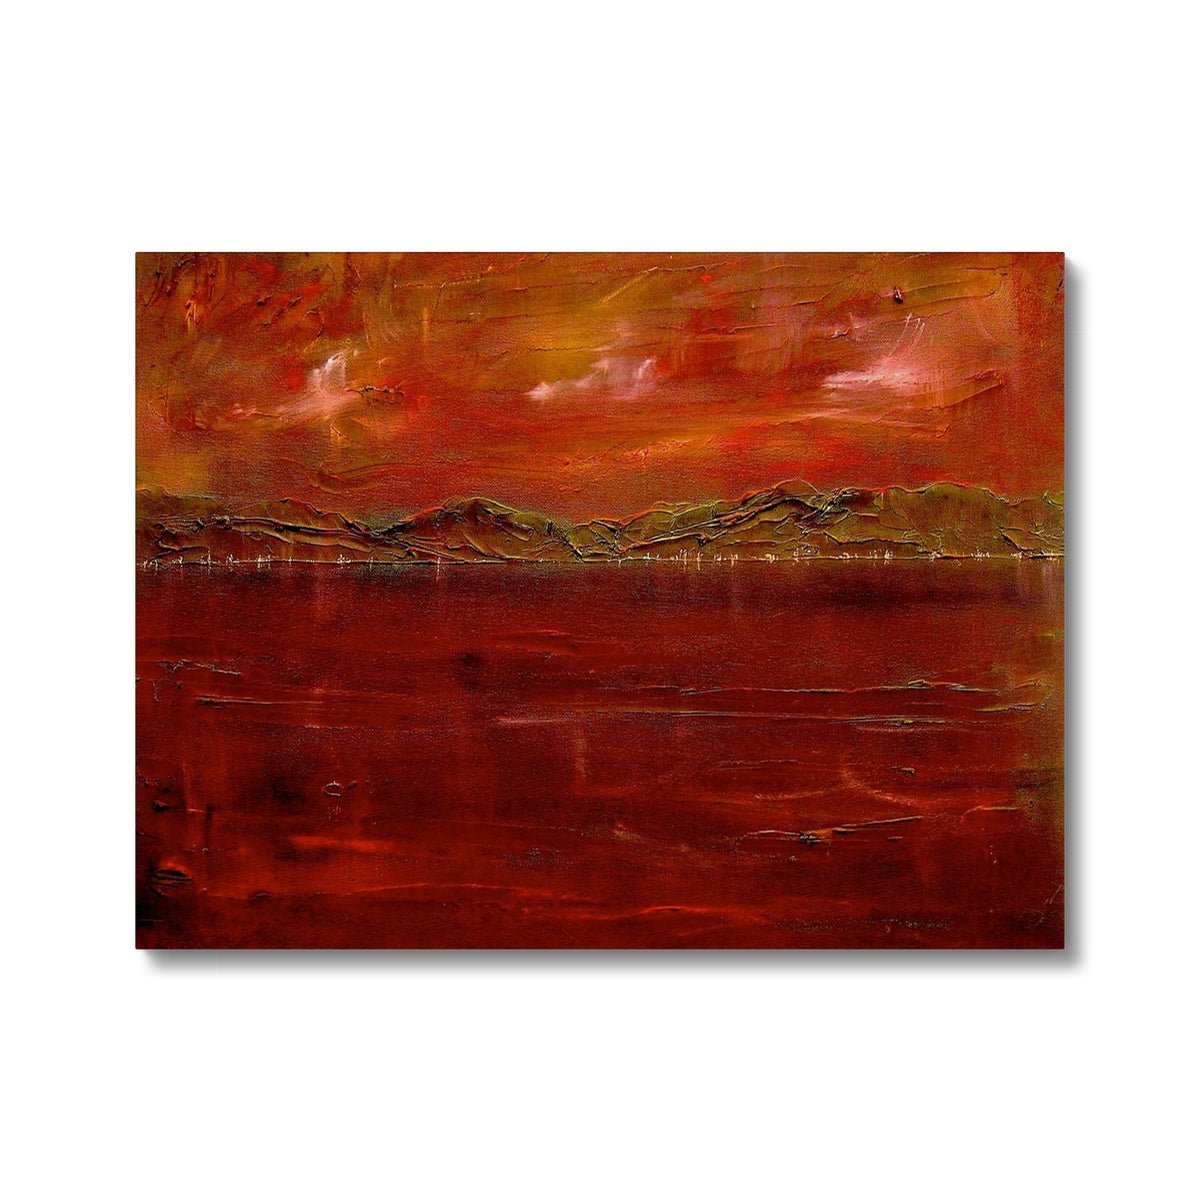 Deep Clyde Dusk Painting | Canvas From Scotland-Contemporary Stretched Canvas Prints-River Clyde Art Gallery-24"x18"-Paintings, Prints, Homeware, Art Gifts From Scotland By Scottish Artist Kevin Hunter